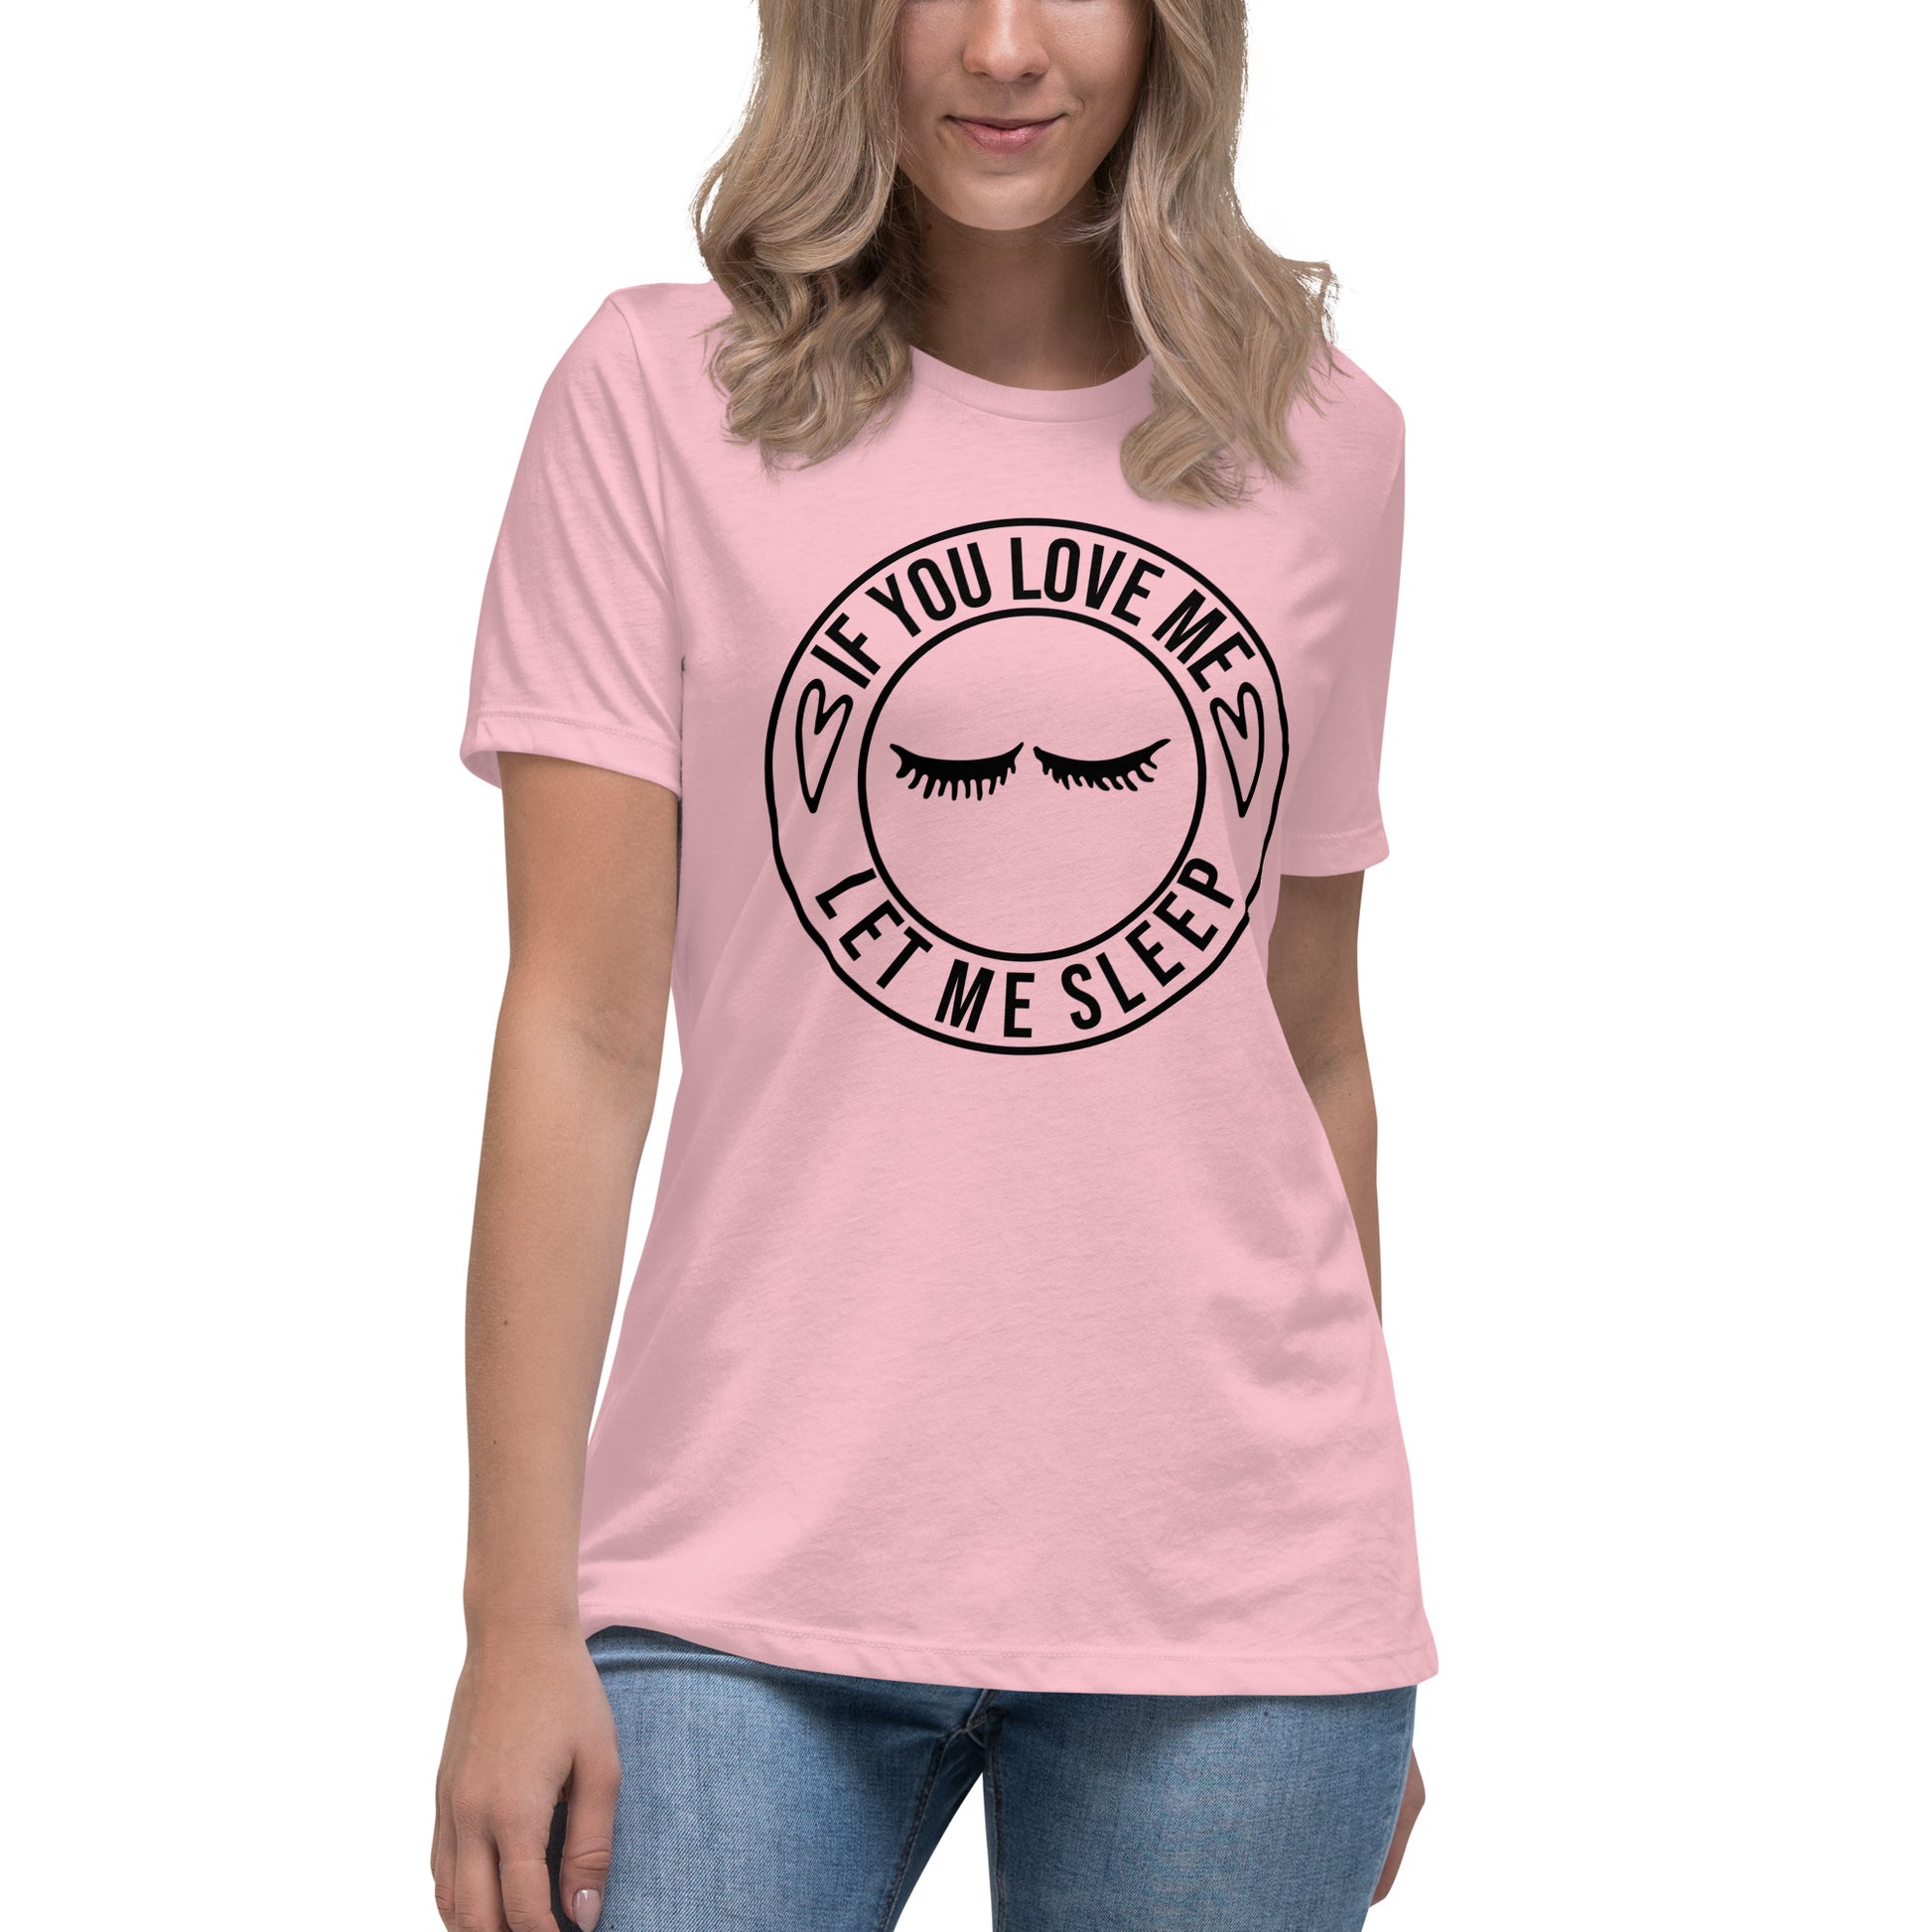 If You Love Me Let Me Sleep Women's Relaxed T-Shirt